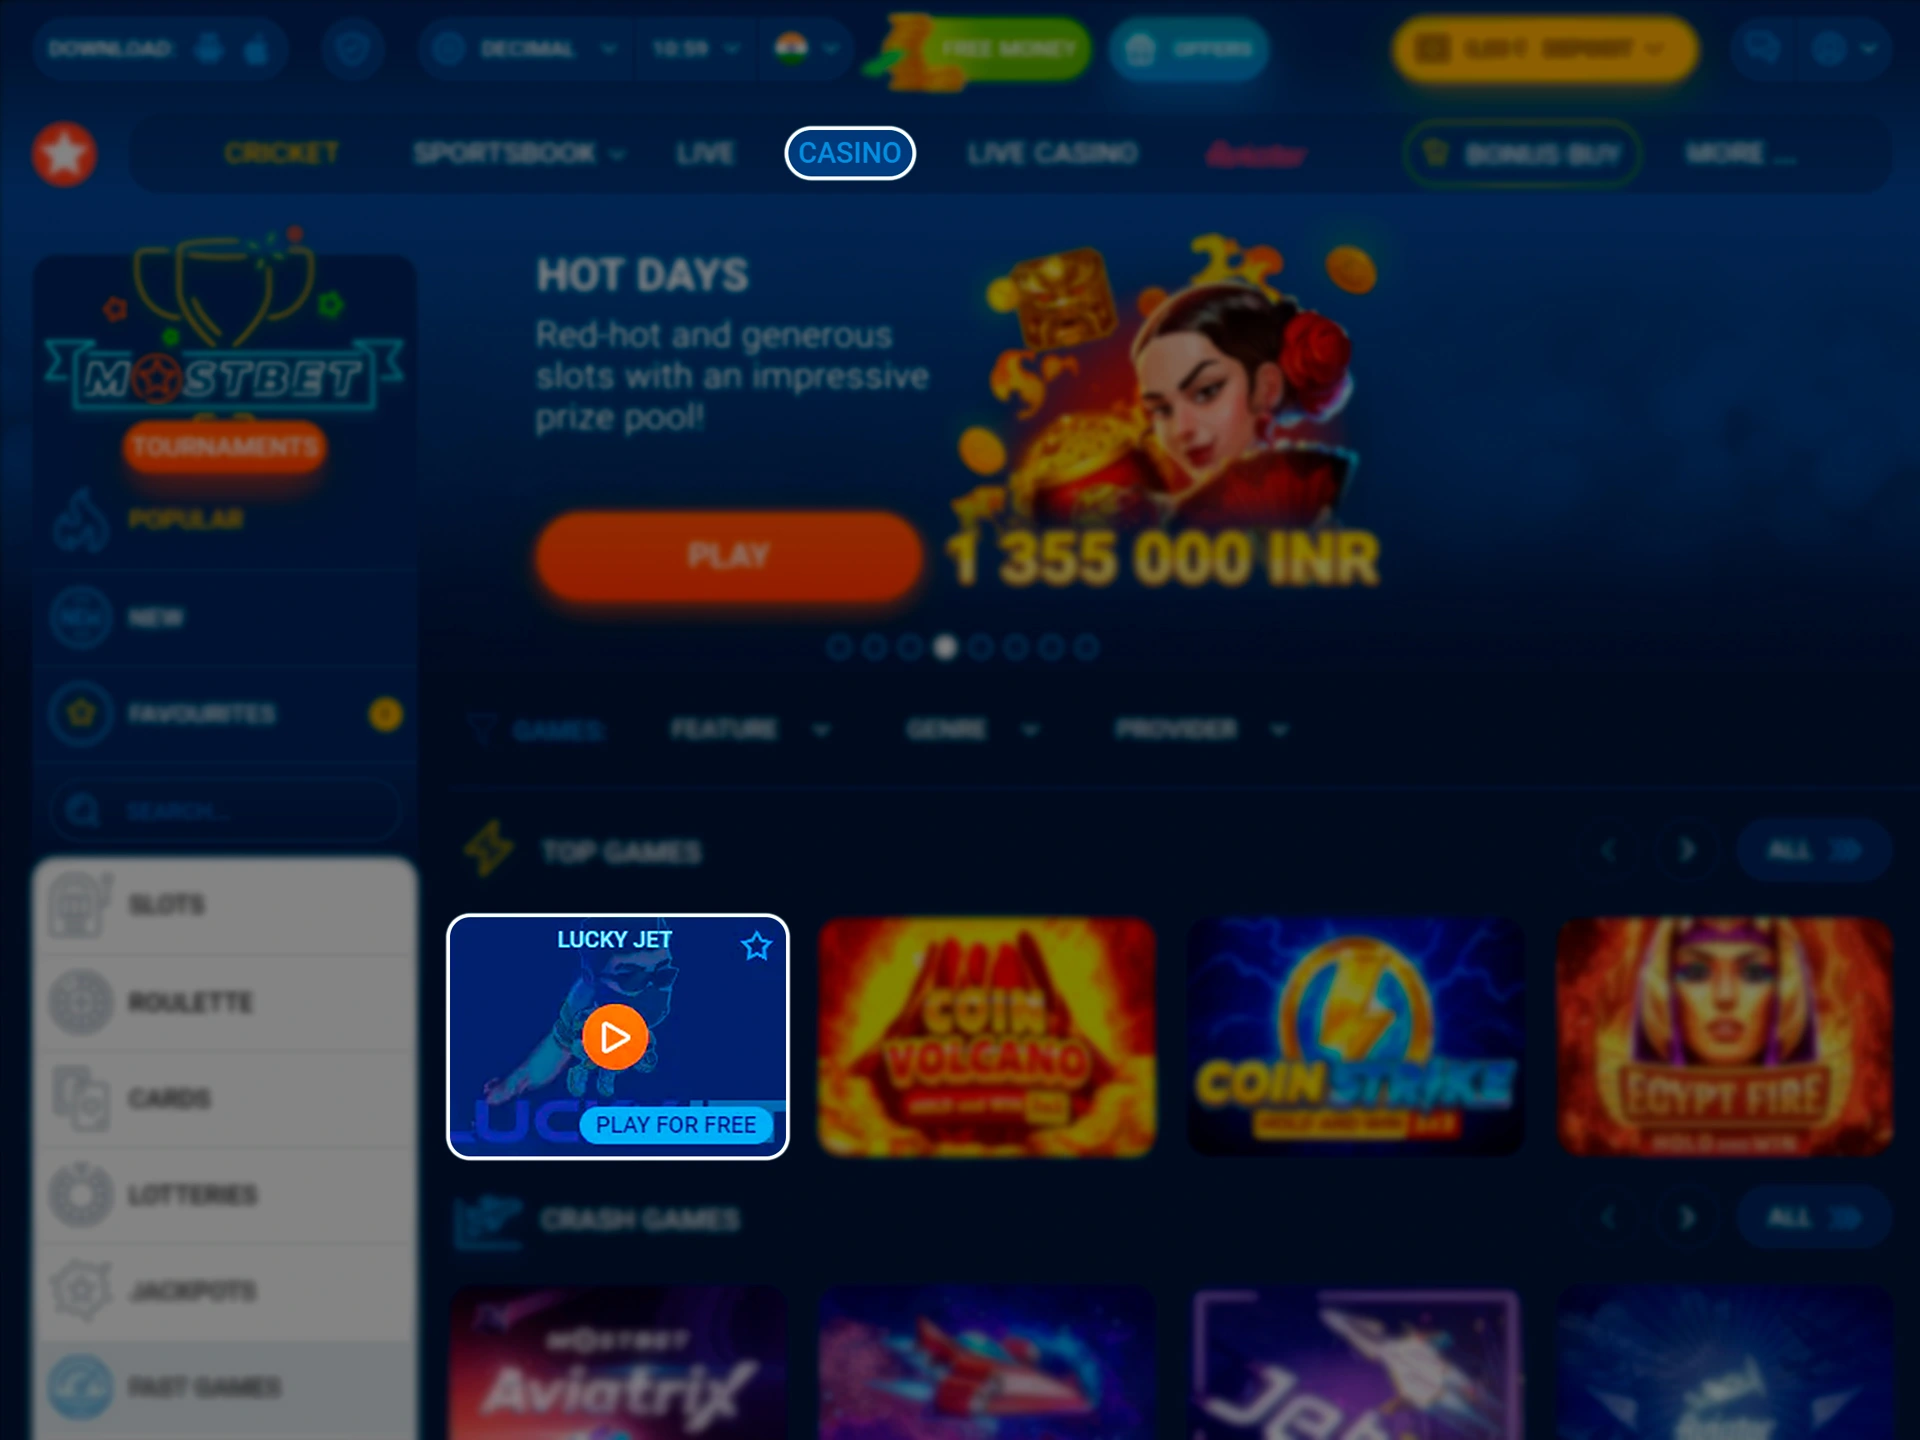 Find the Lucky Jet game in the MostBet casino section.